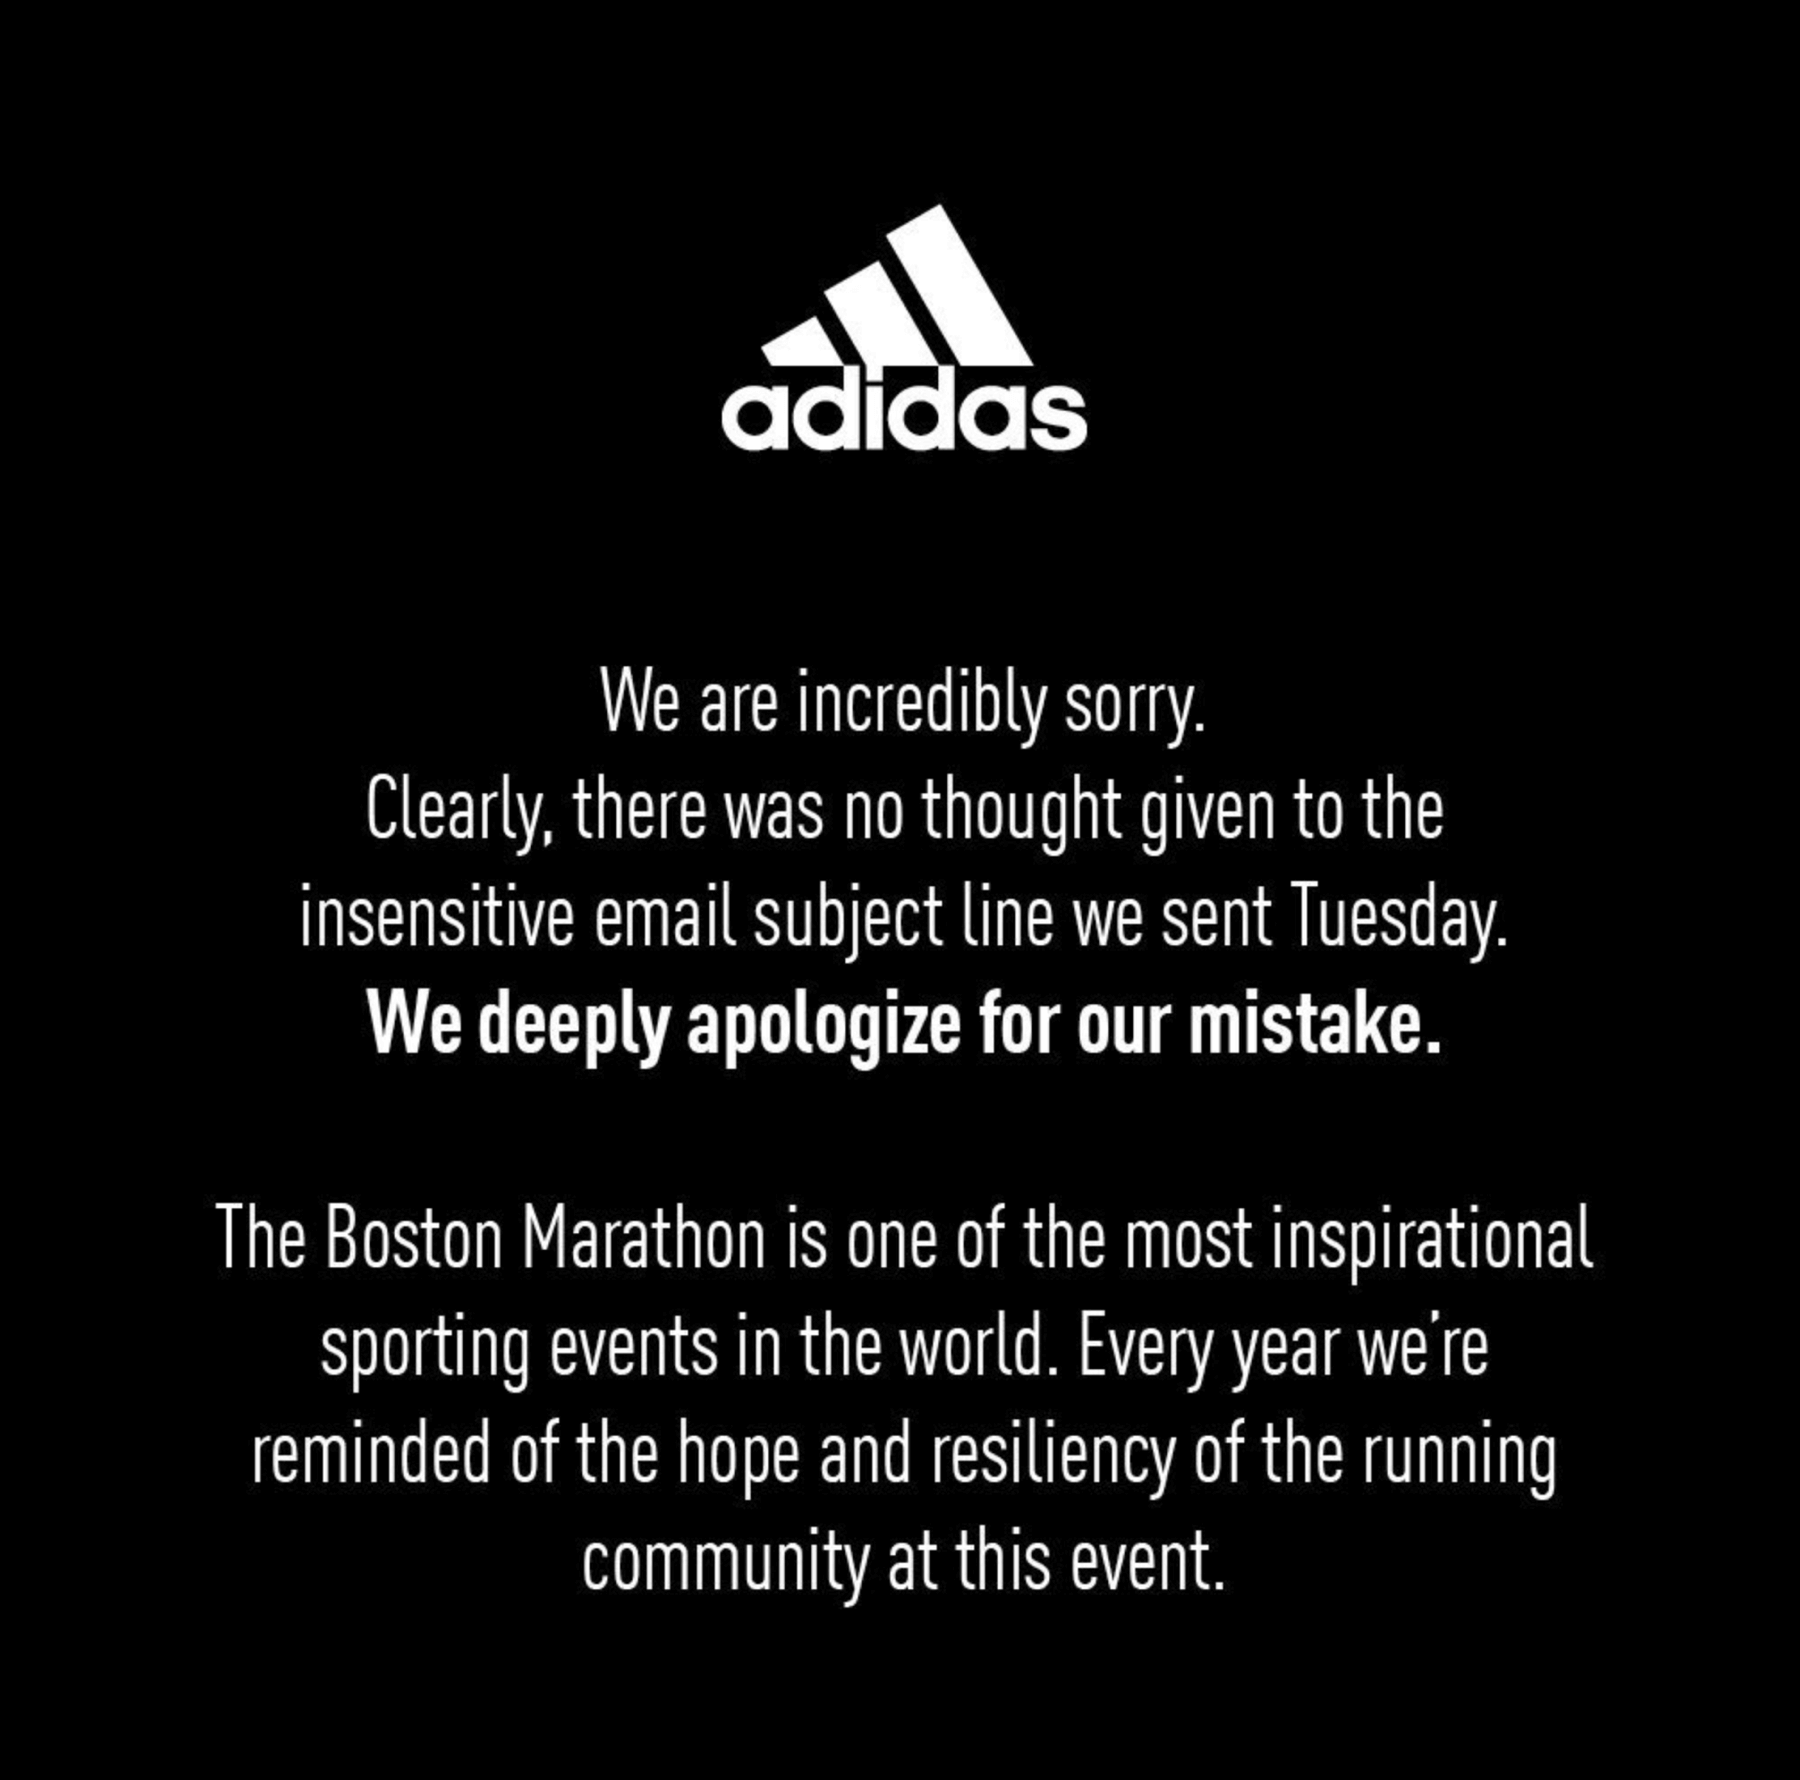 Adidas's big email apology